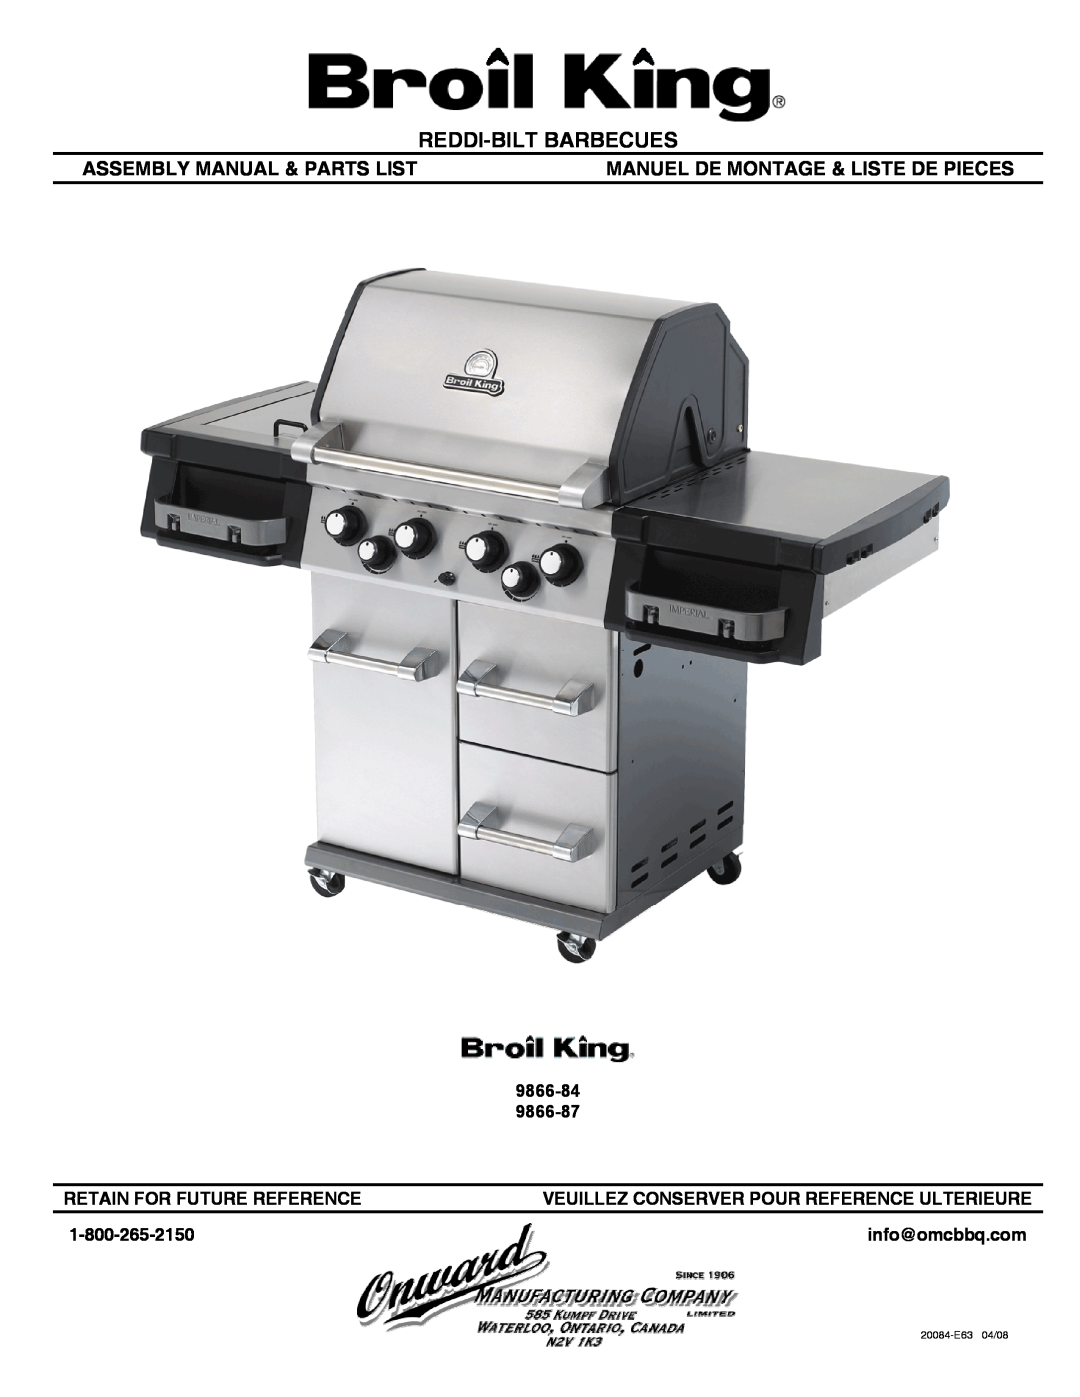 Broil King manual 9866-84 9866-87, Retain For Future Reference, Veuillez Conserver Pour Reference Ulterieure 